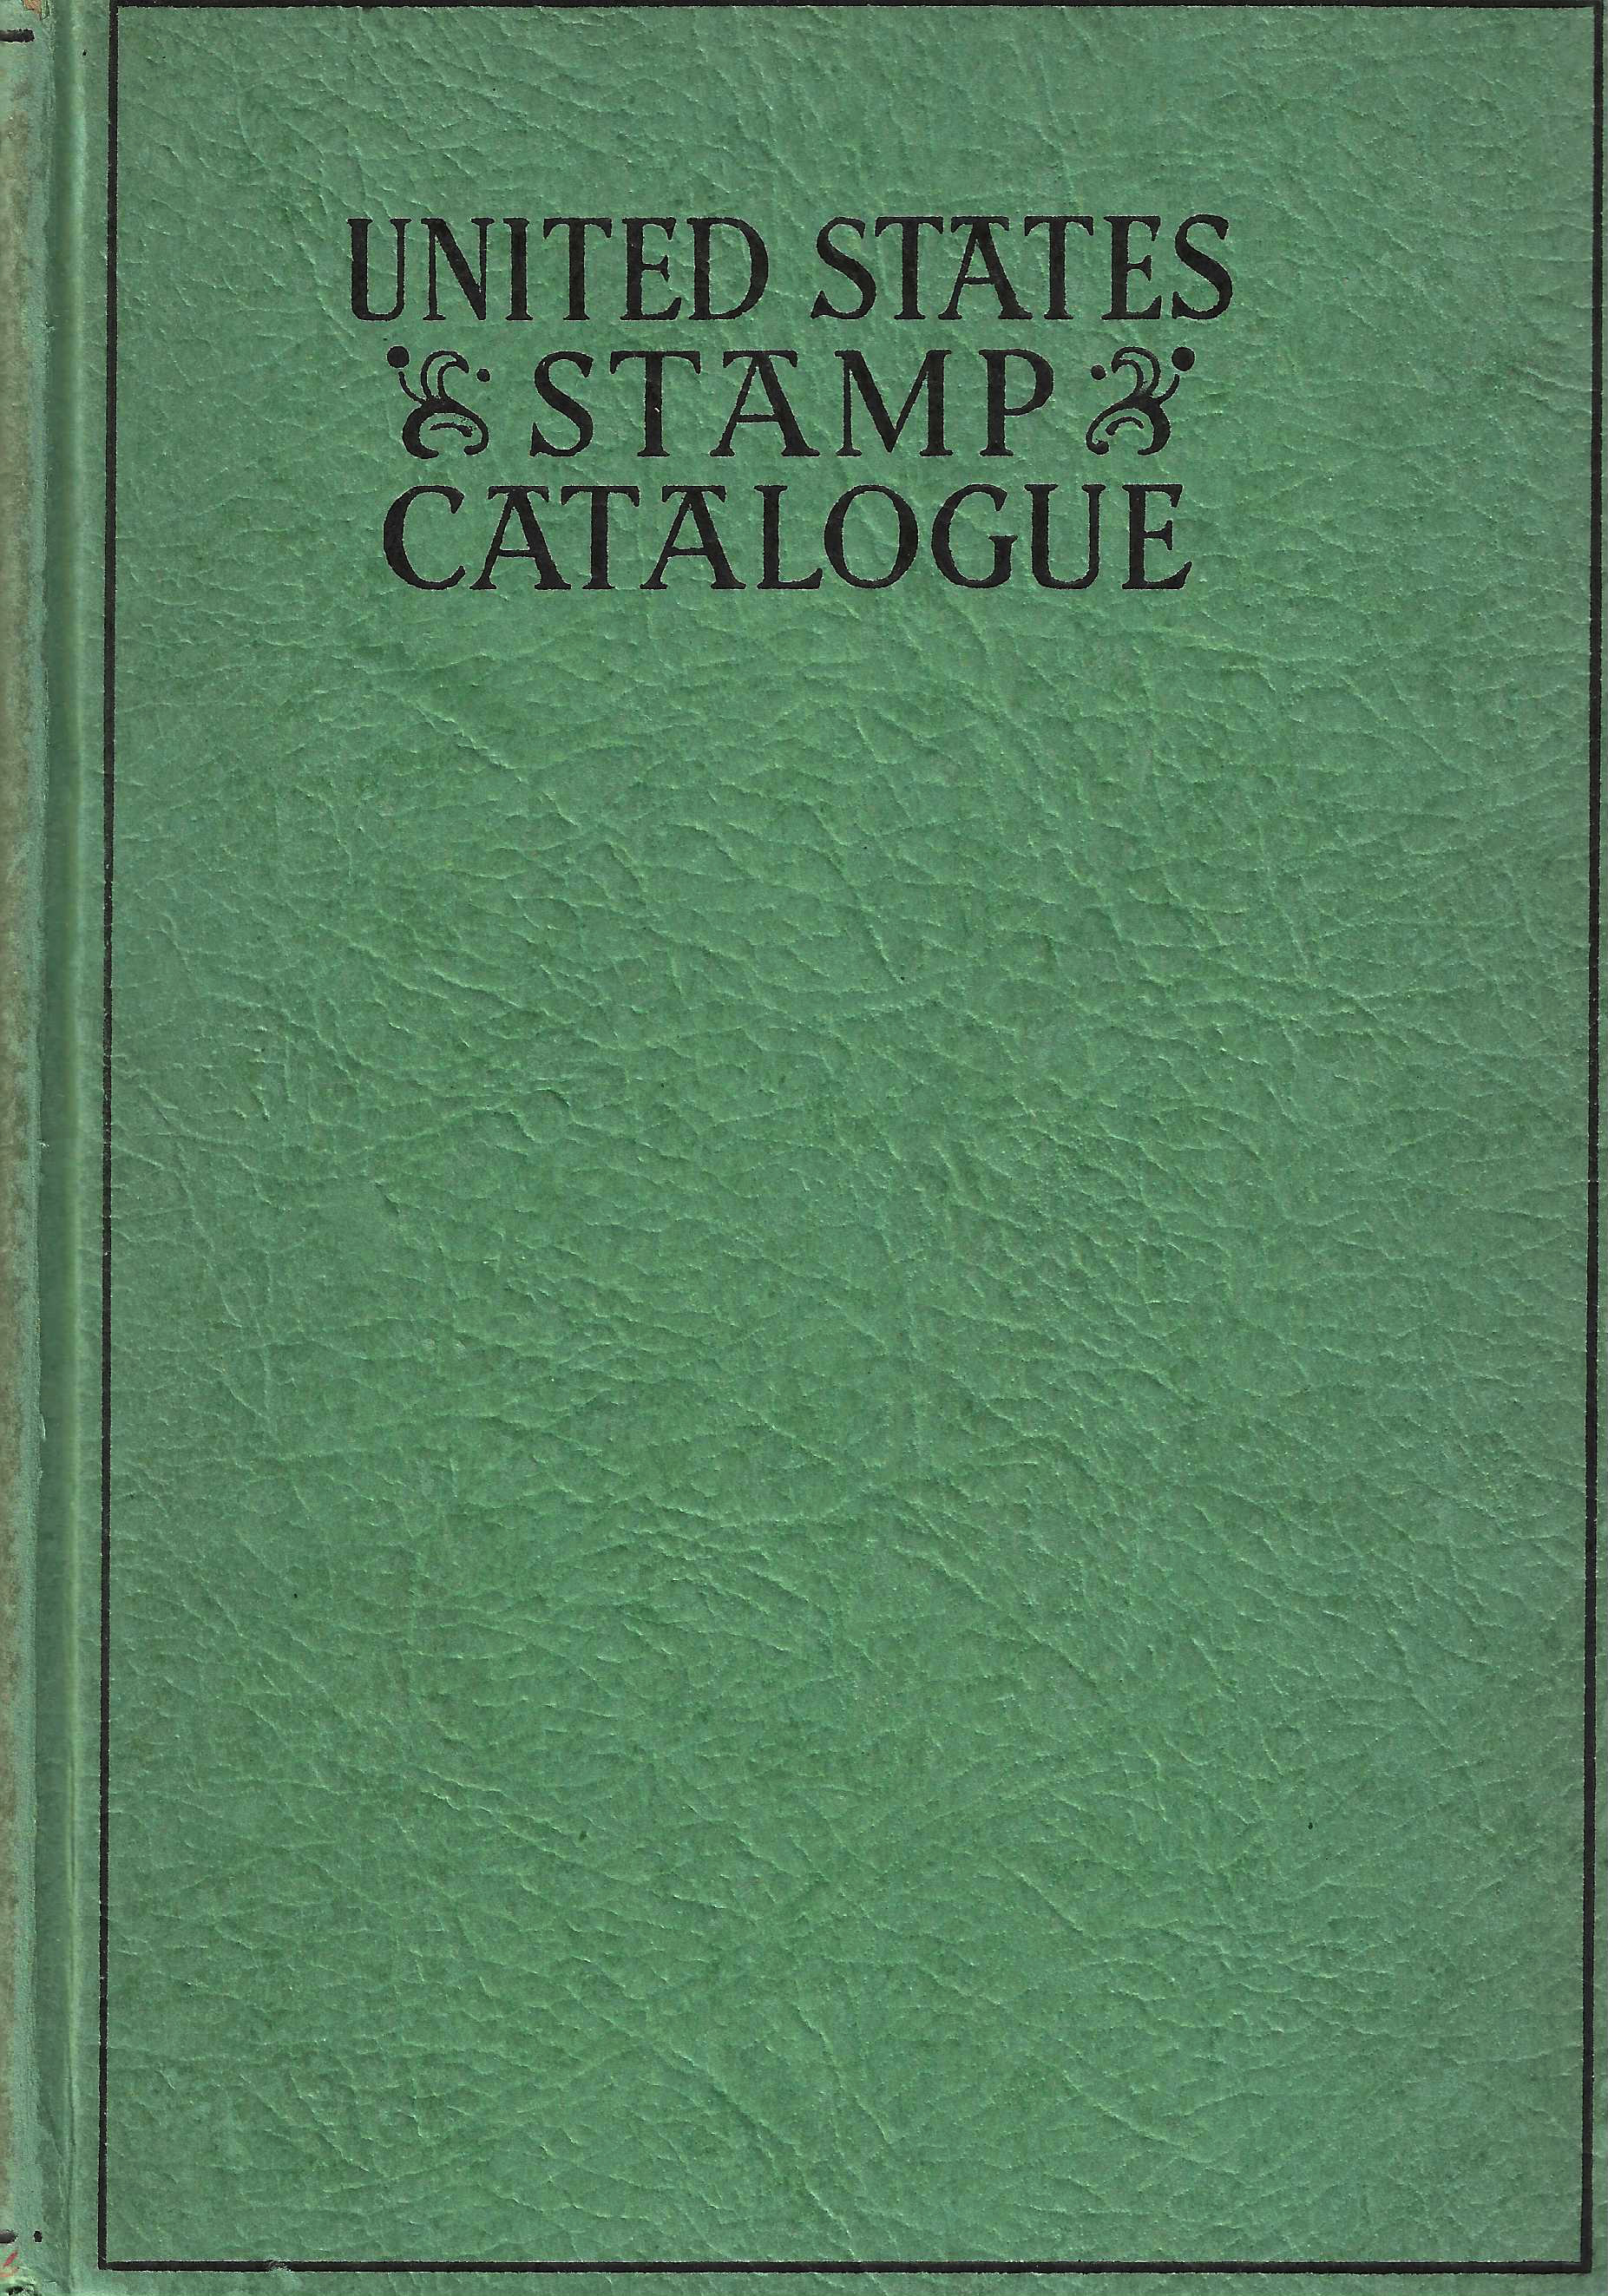 CATALOG  -Scott Publications 1946 United States Specialized Stamp Catalog, fine used  condition